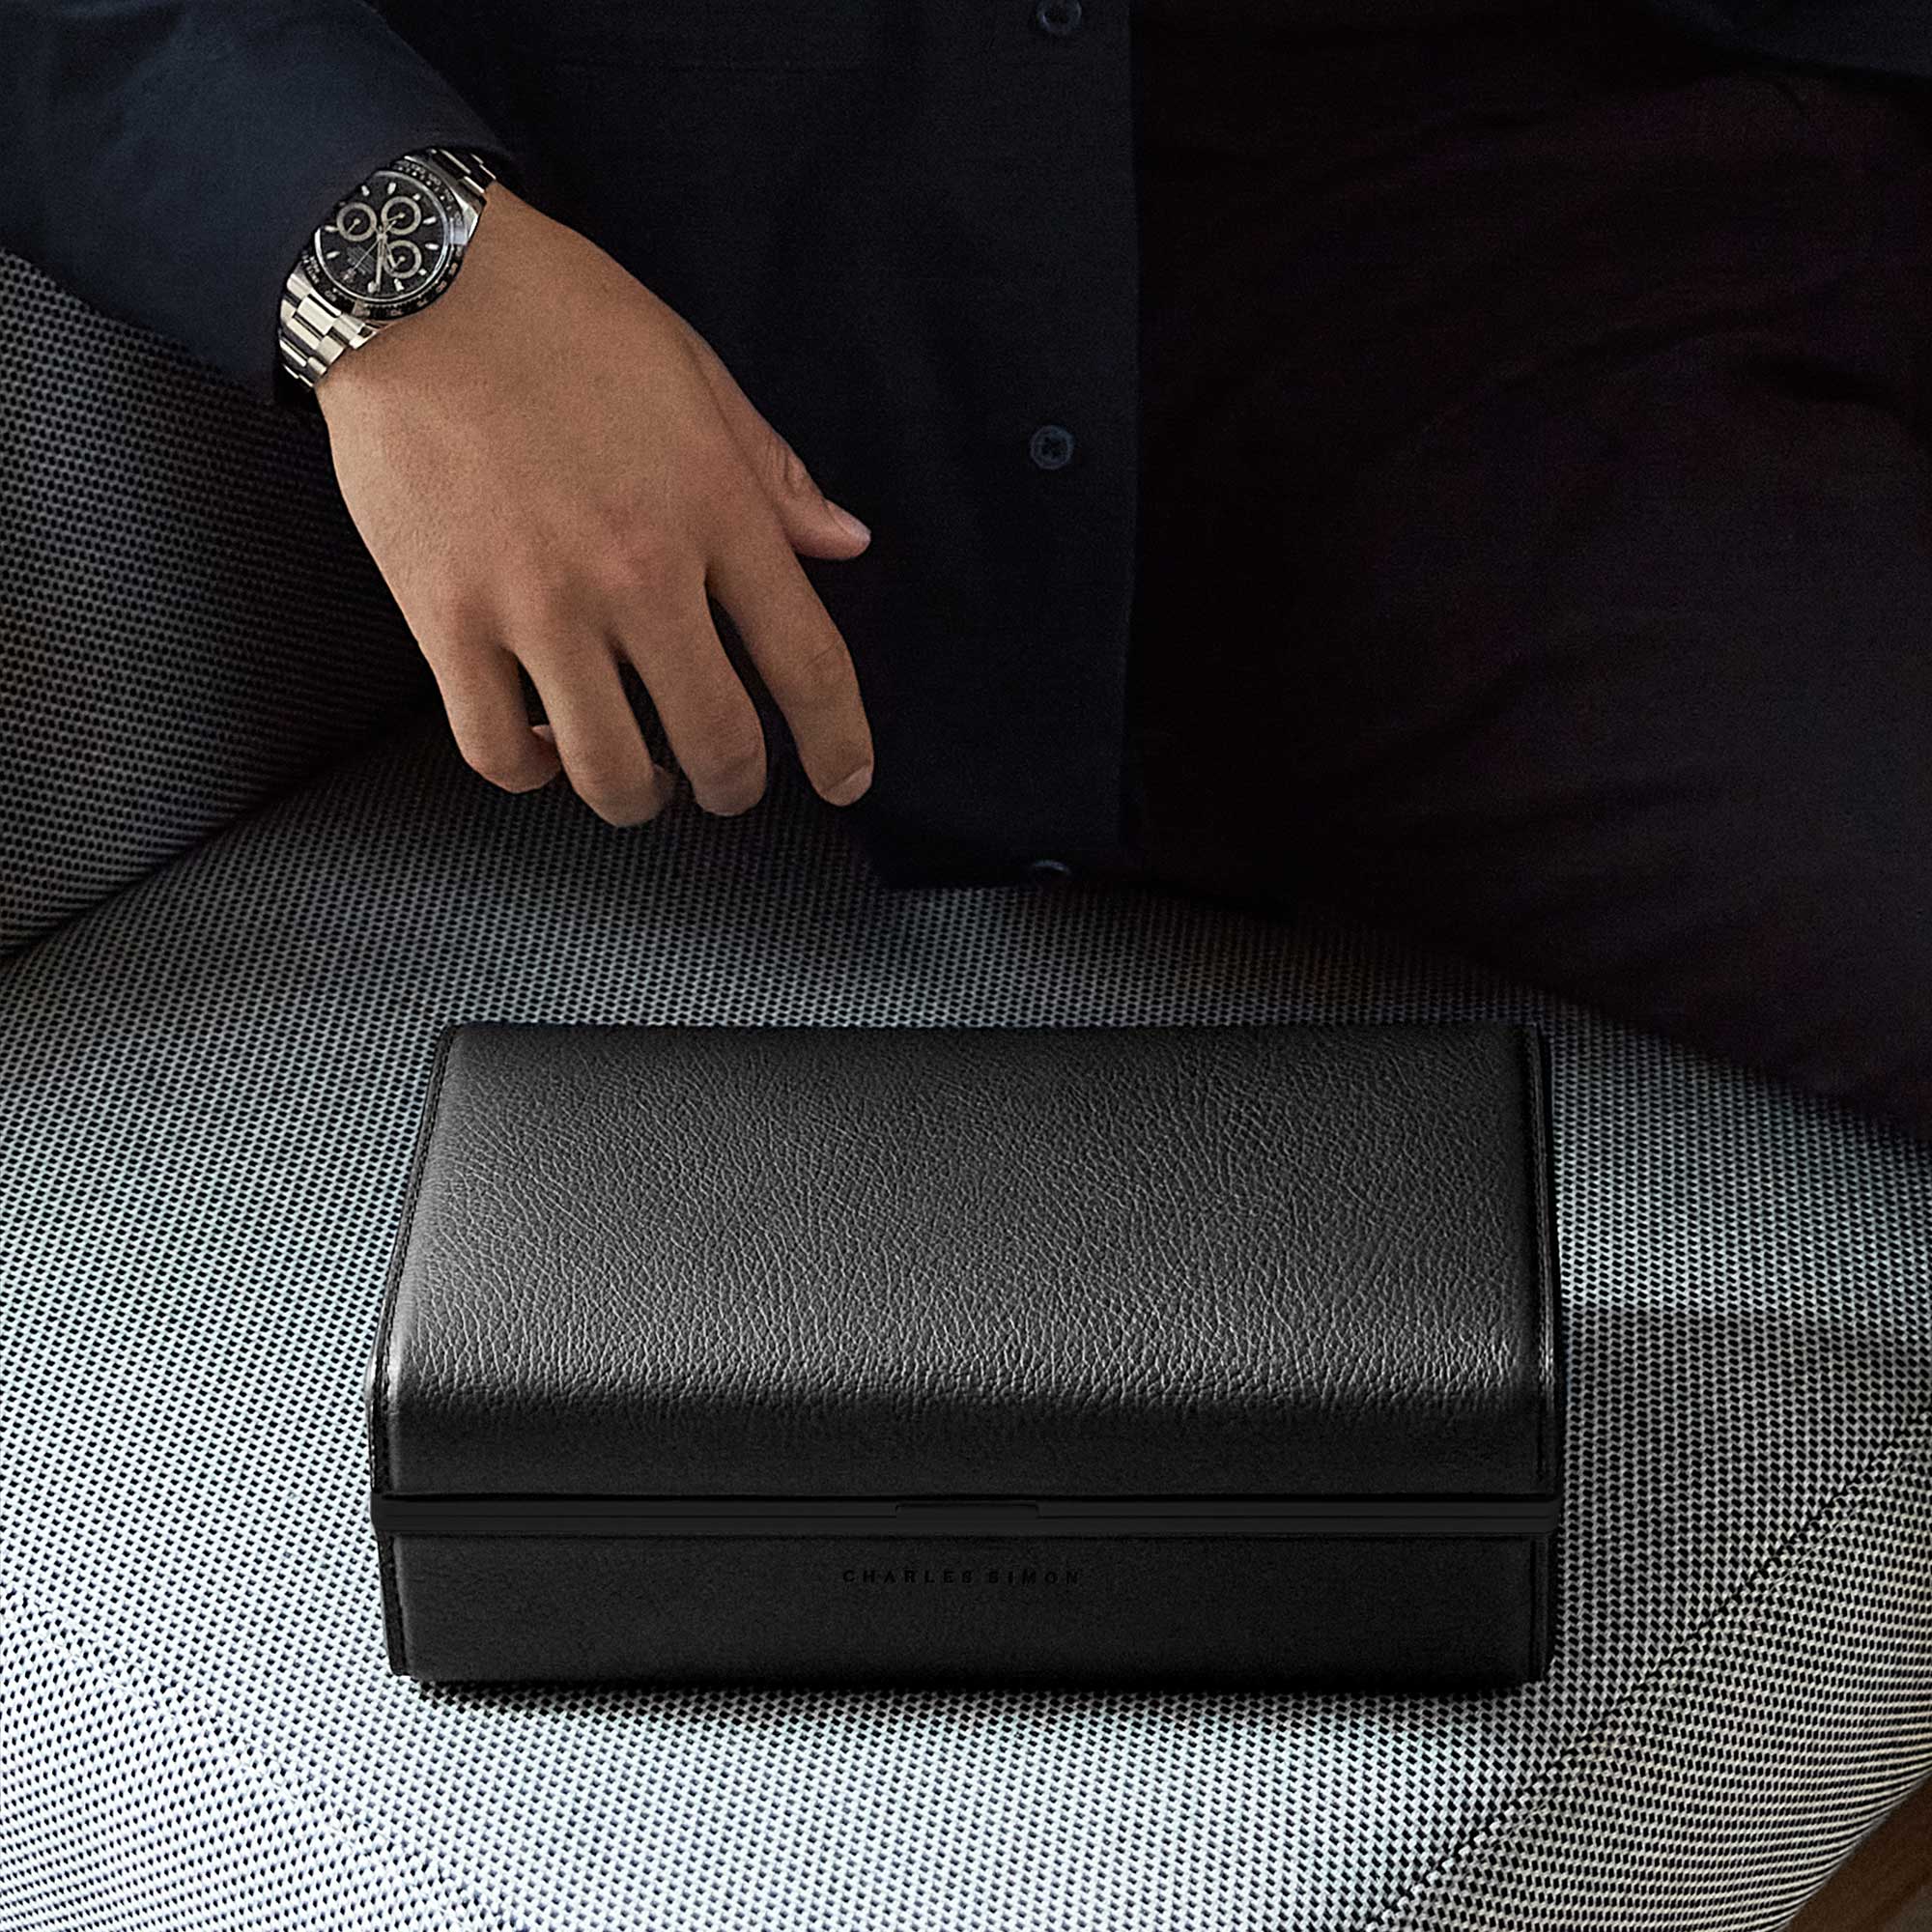 Eaton 3 watch case in all black leather, anodized aluminum and black Alcantara placed on grey couch with gentleman's hand sporting men's luxury watch hovering above